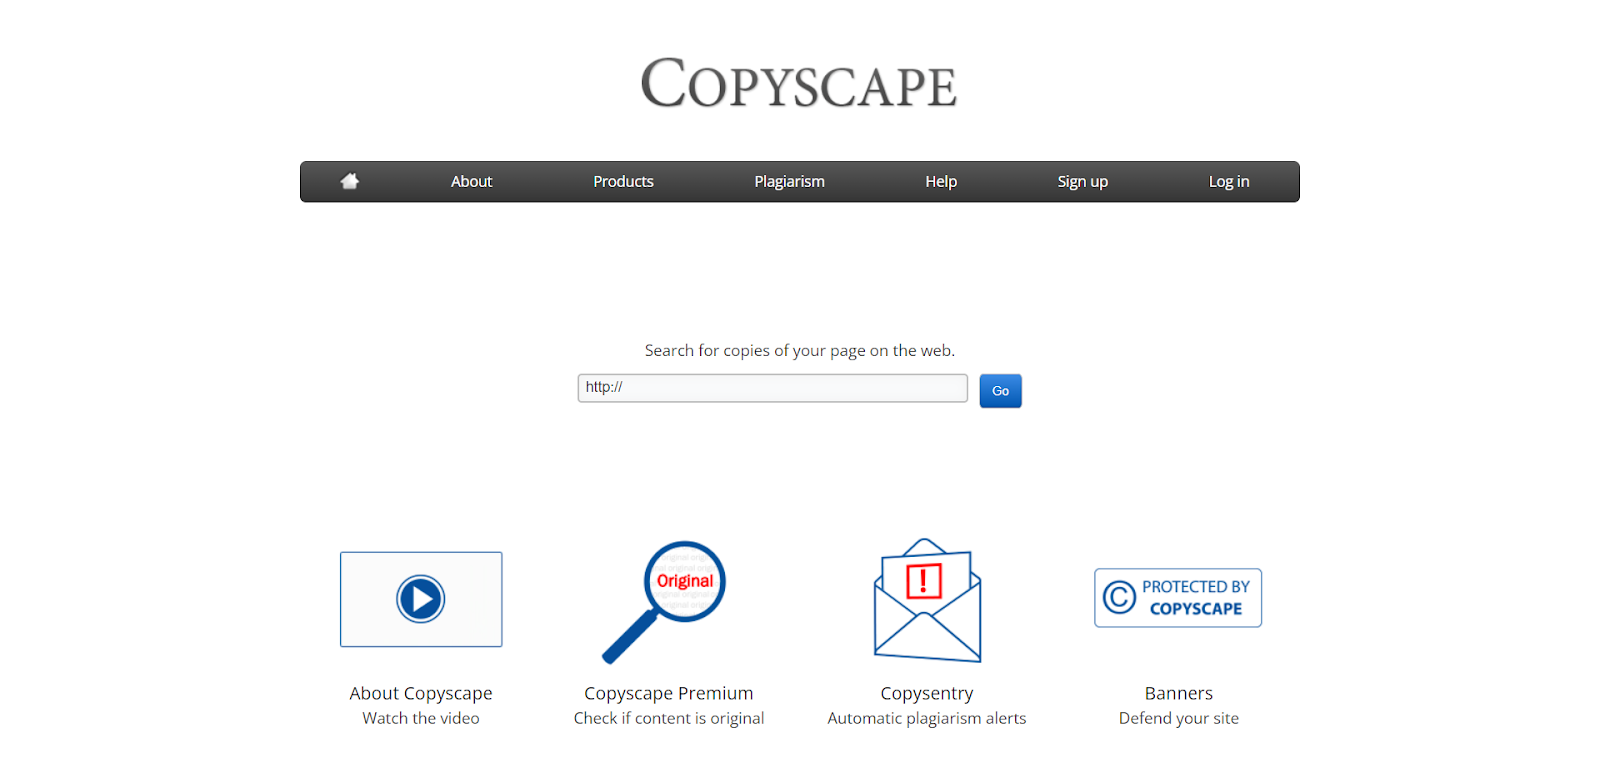 Use Copyscape to detect plagiarism